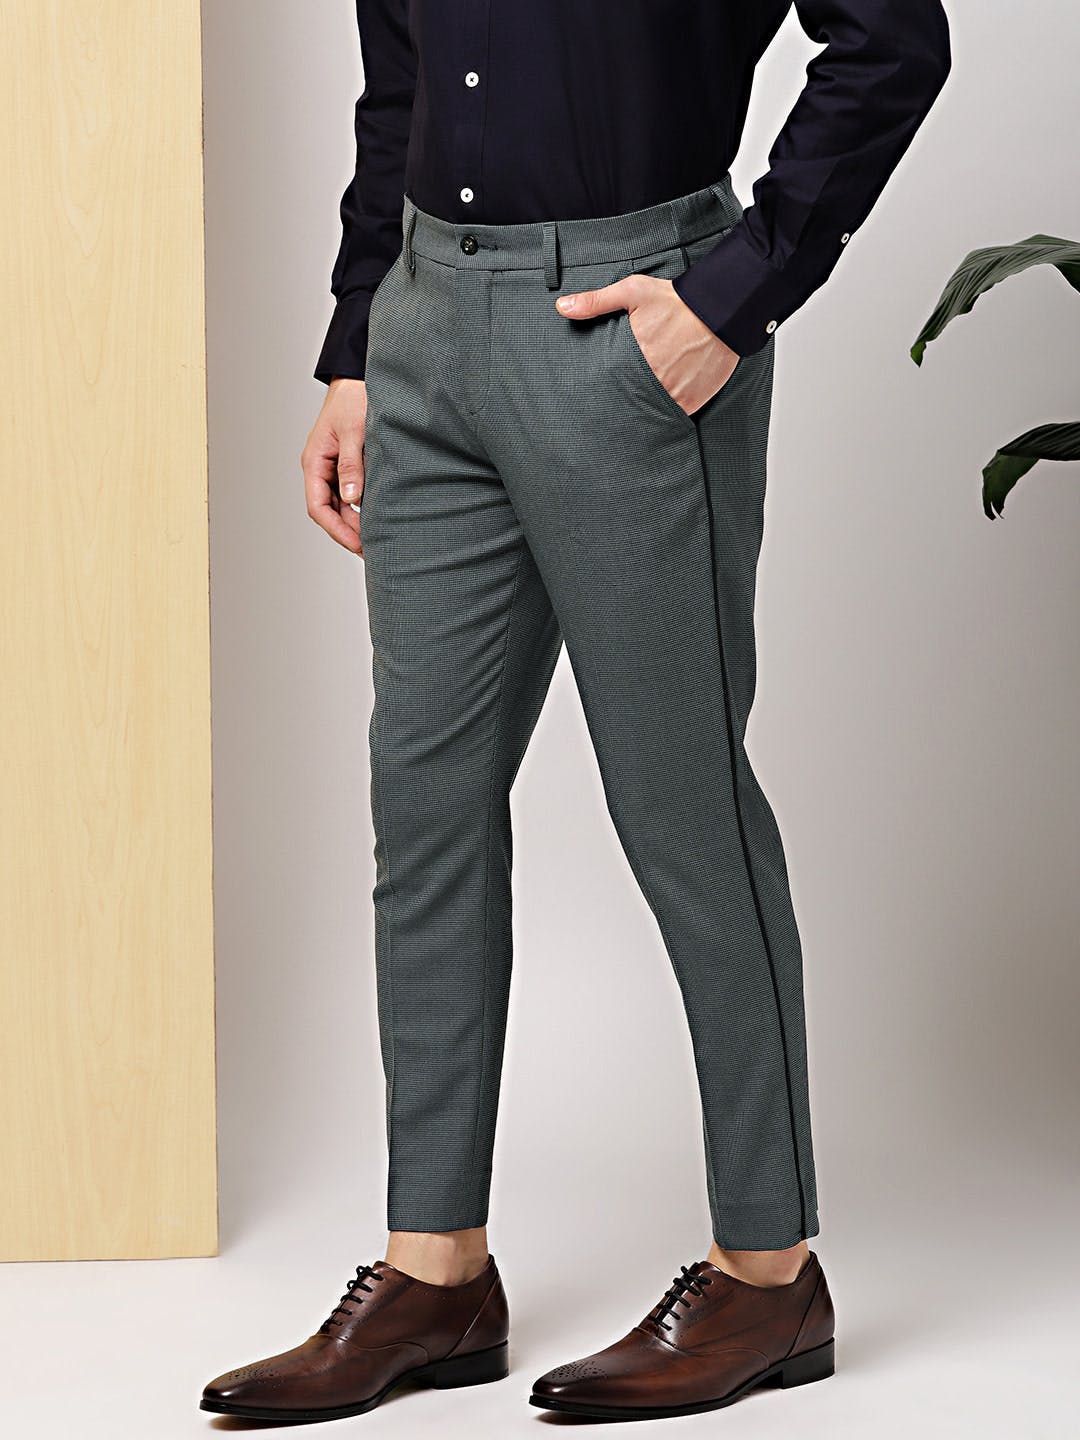 Elegant classic trousers pants for women and men Vector Image